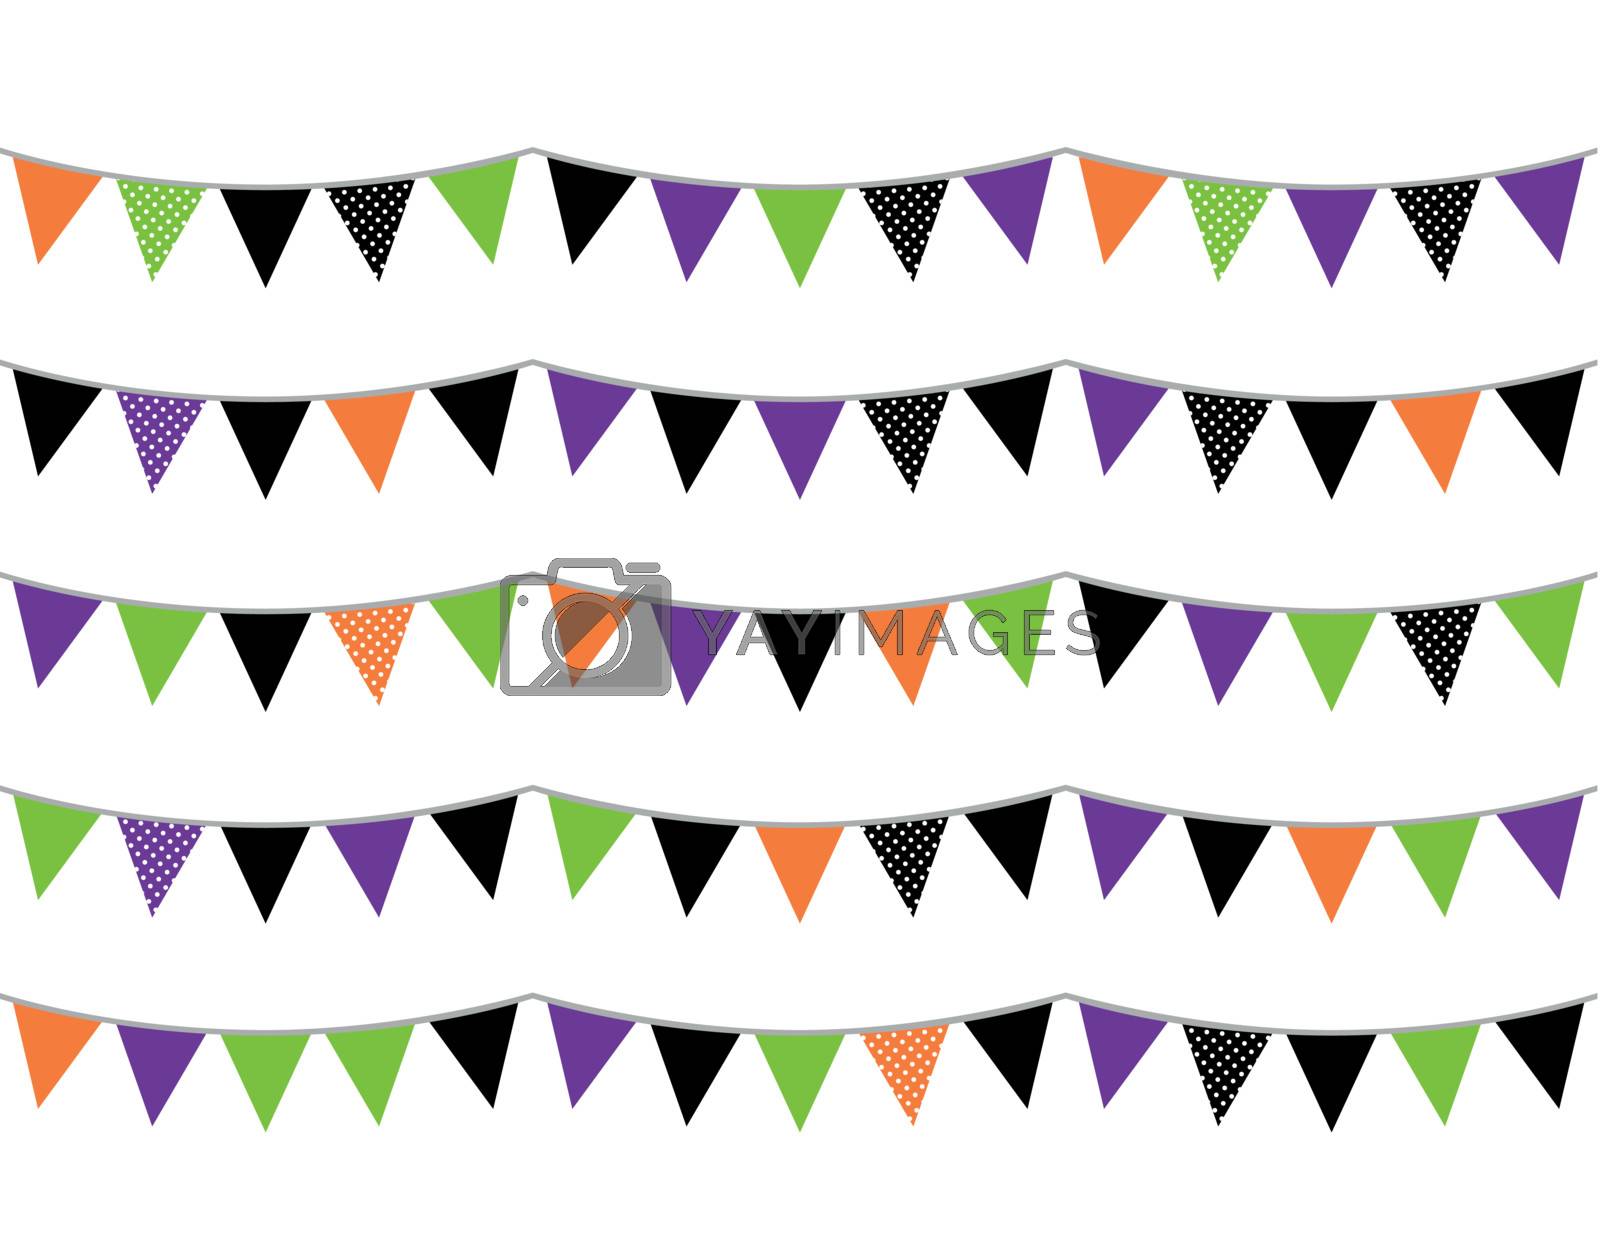 Royalty free image of Halloween flags or bunting isolated on white by Lordalea